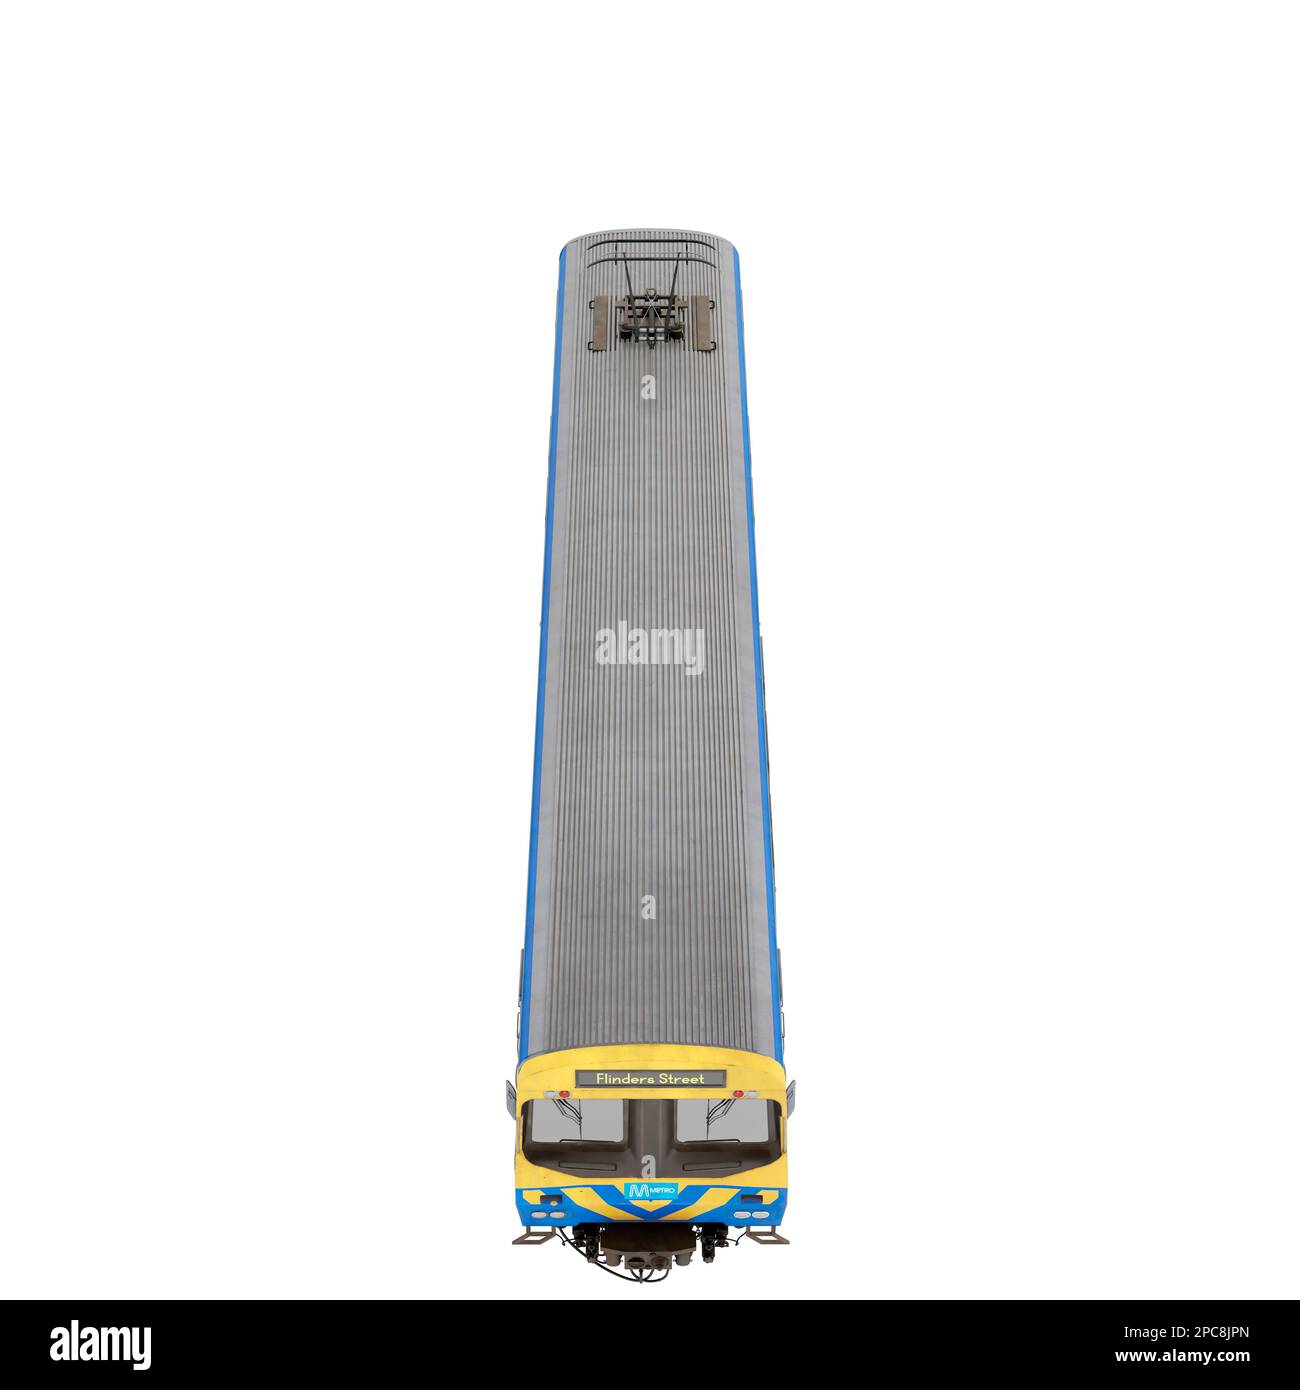 A bottom view of a blue and yellow skateboard, showing the intricate design and construction of the board Stock Photo